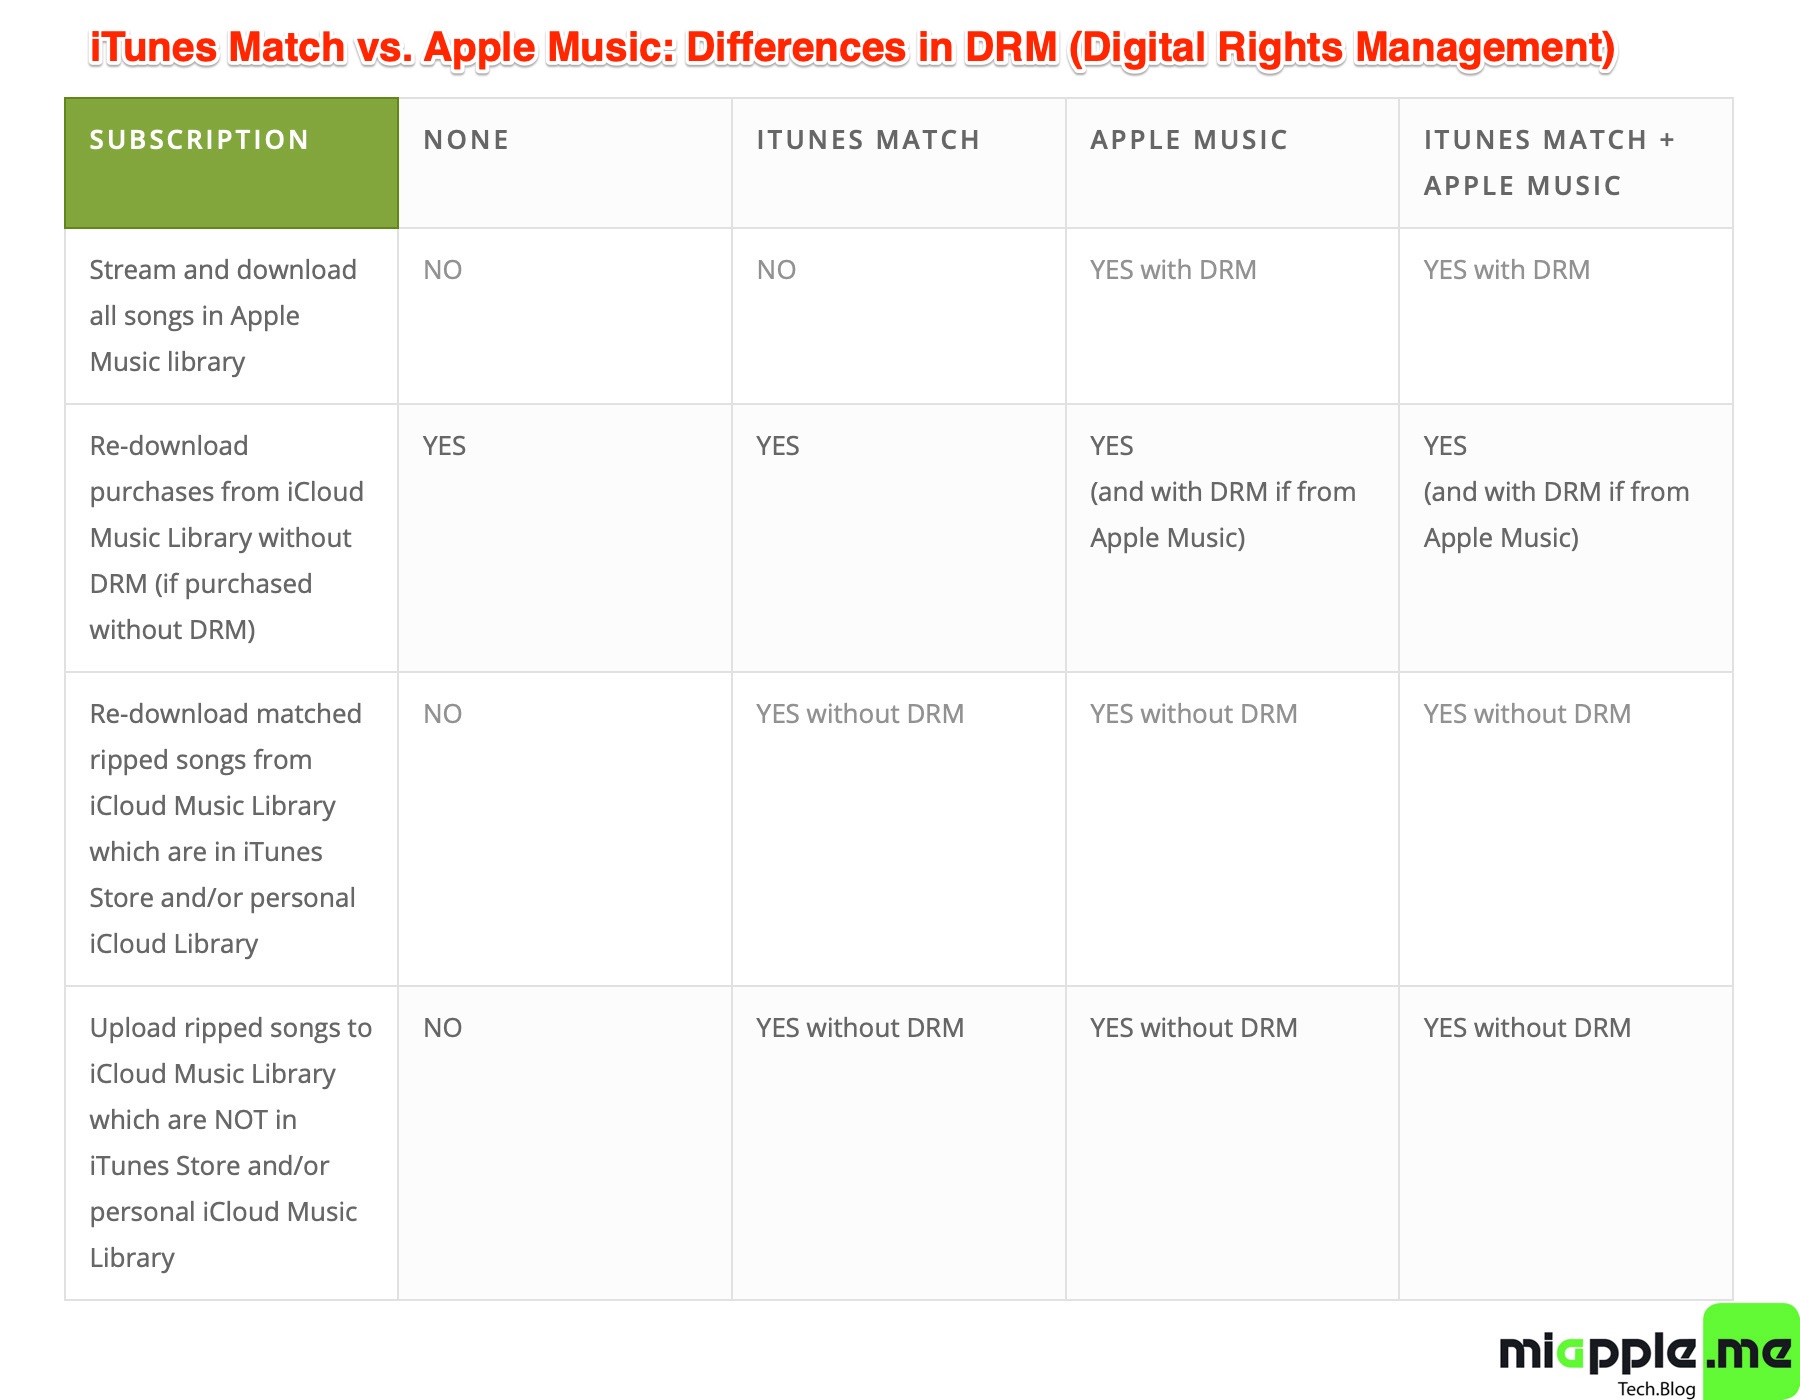 iTunes Match vs. Apple Music Difference in DRM Digital Rights Management